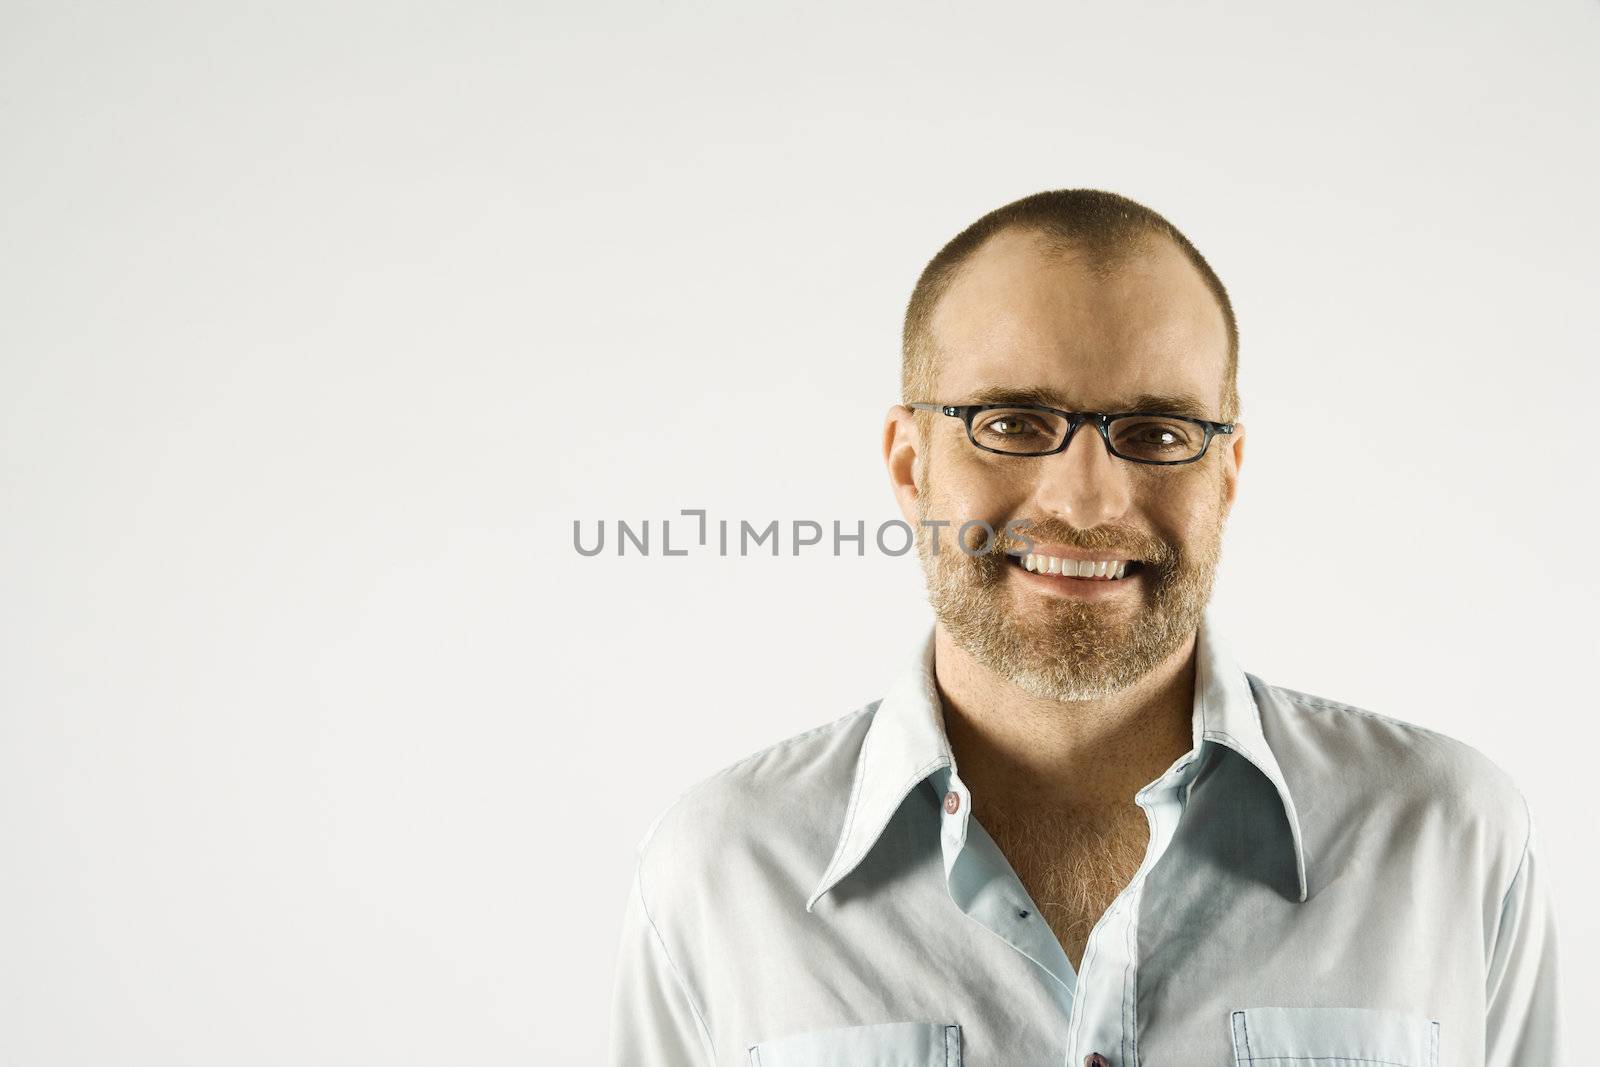 Head and shoulder portrait of Caucasian man smiling against white background.